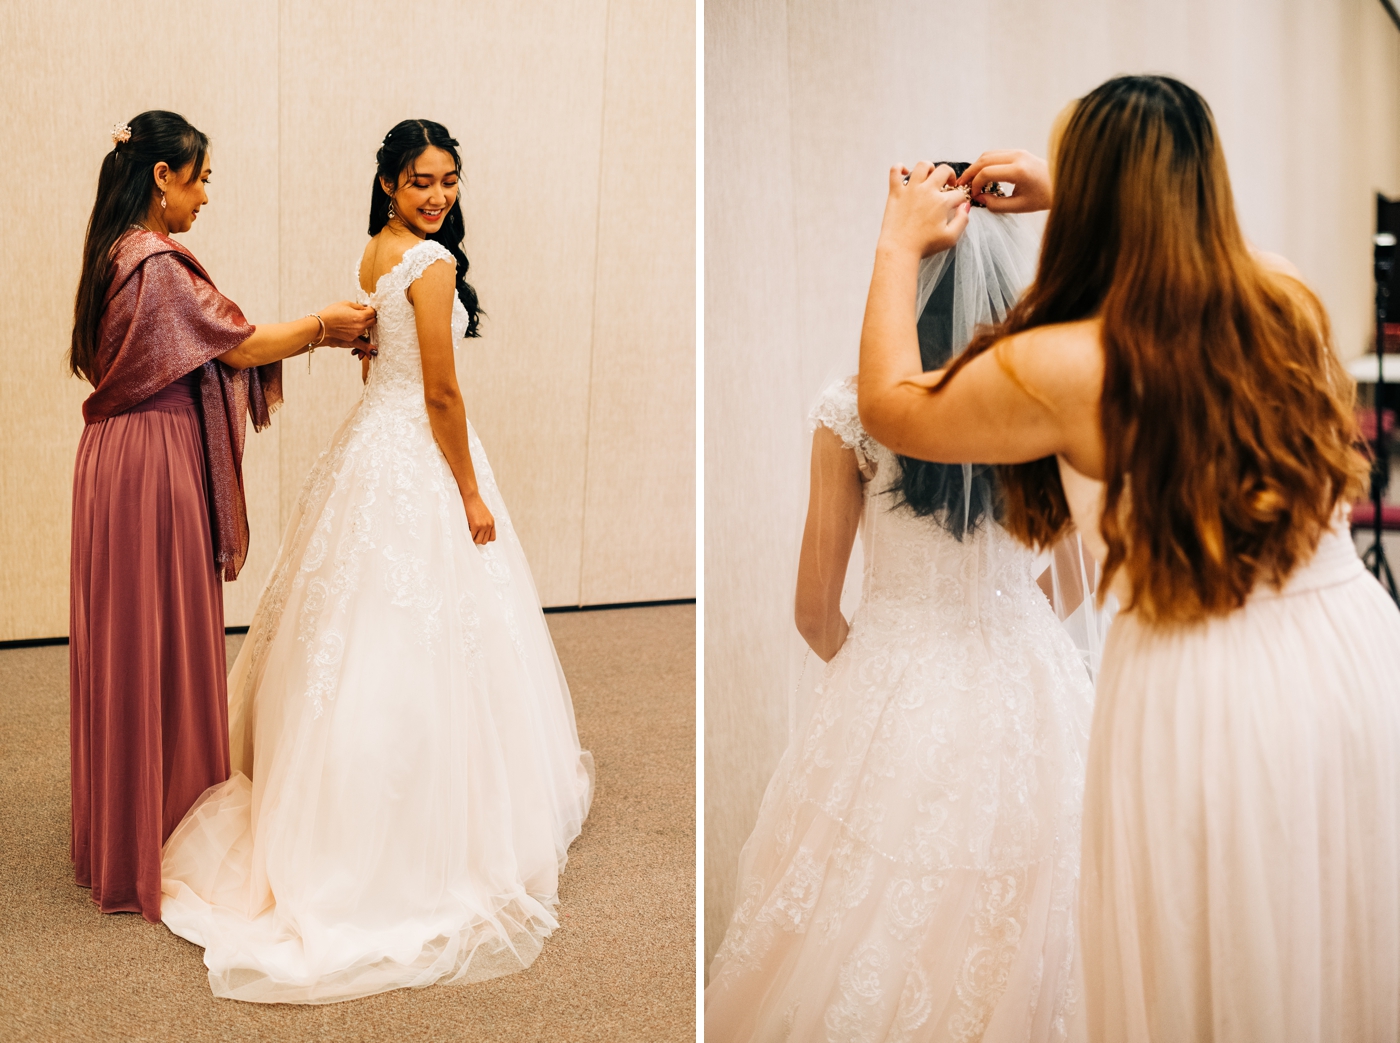 Mom helping her daughter get into her ballgown wedding dress